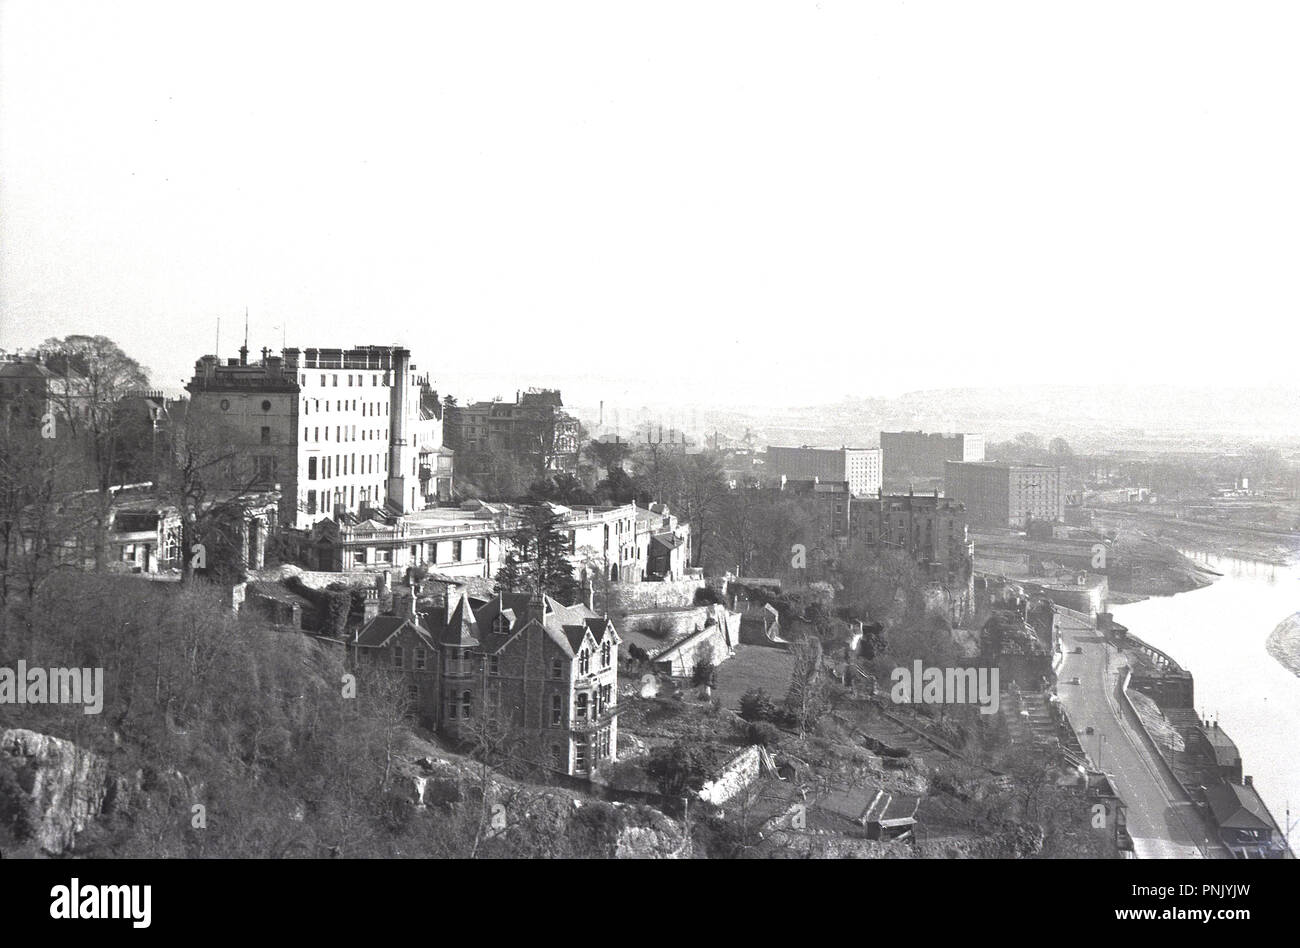 1950s, Bristol, view from the clifton suspension bridge across the city and River Avon. Stock Photo